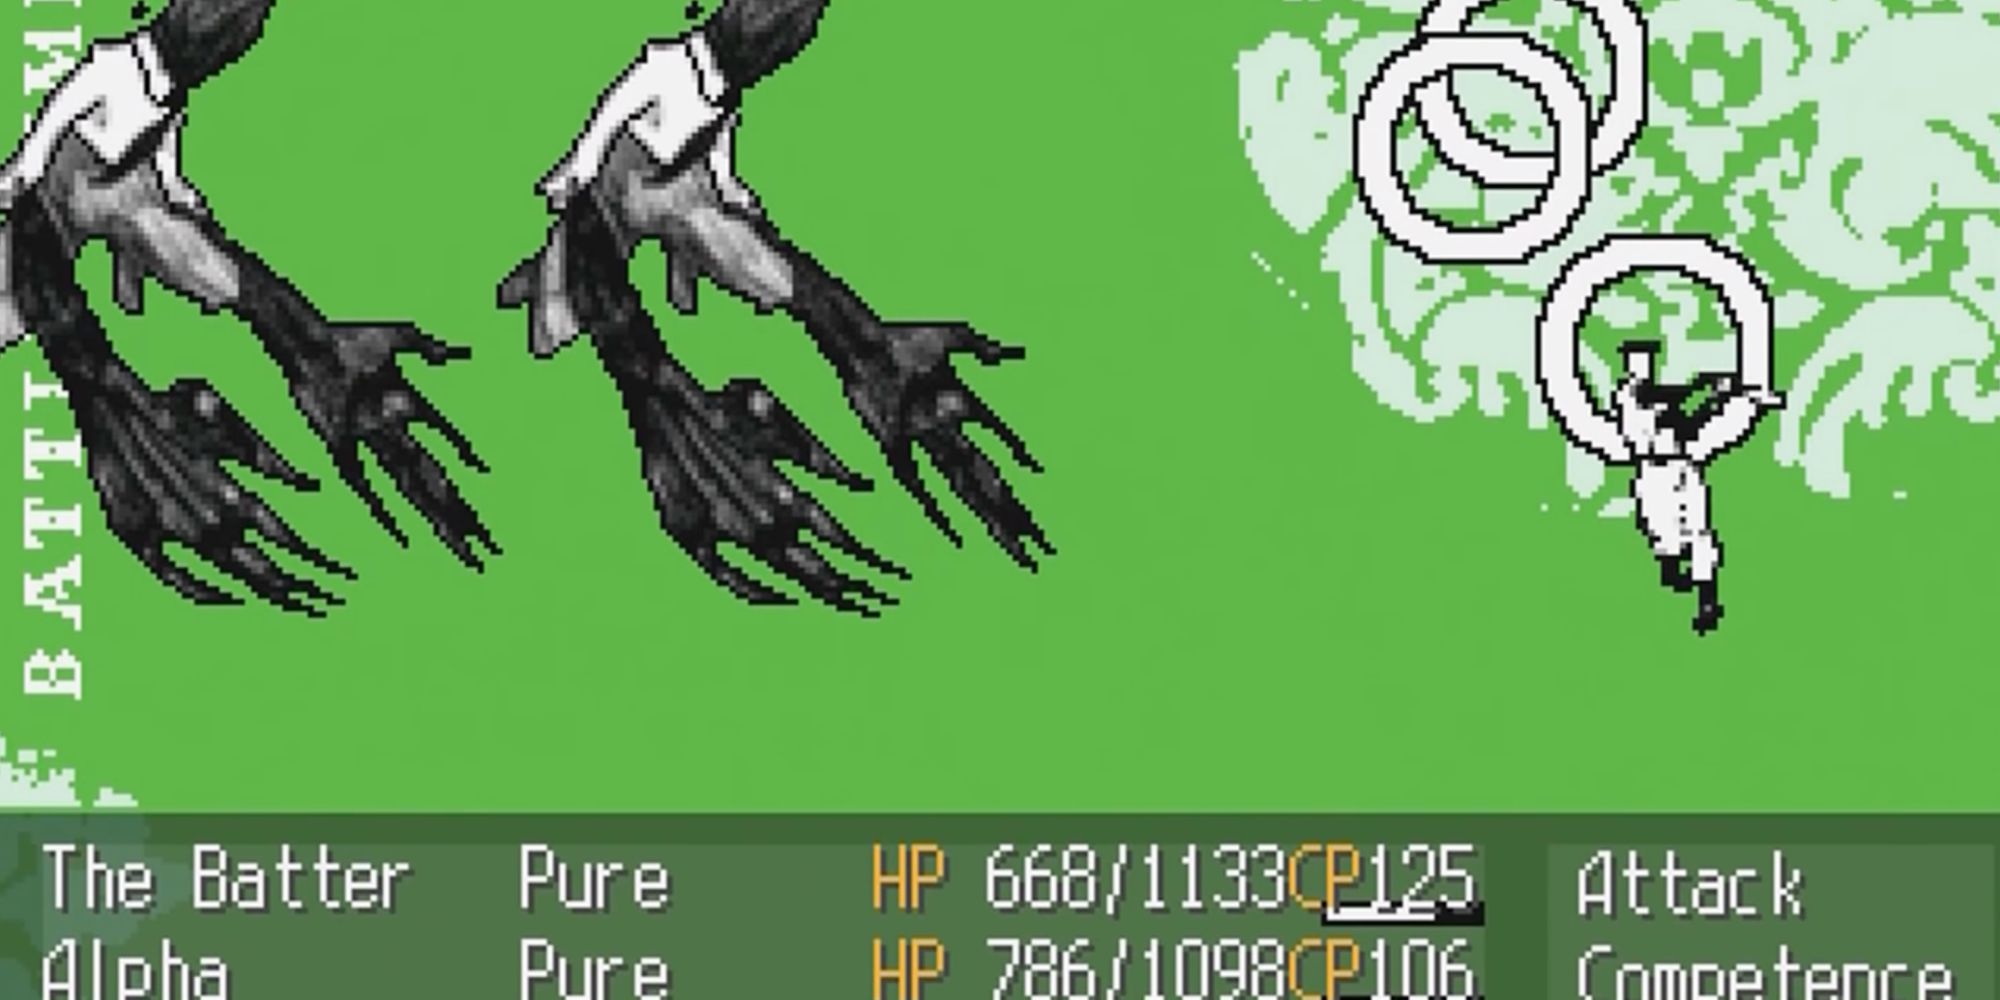 A screenshot of Mortis Ghost's RPG Maker game Off, showing The Batter in battle against strange creatures with giant hands